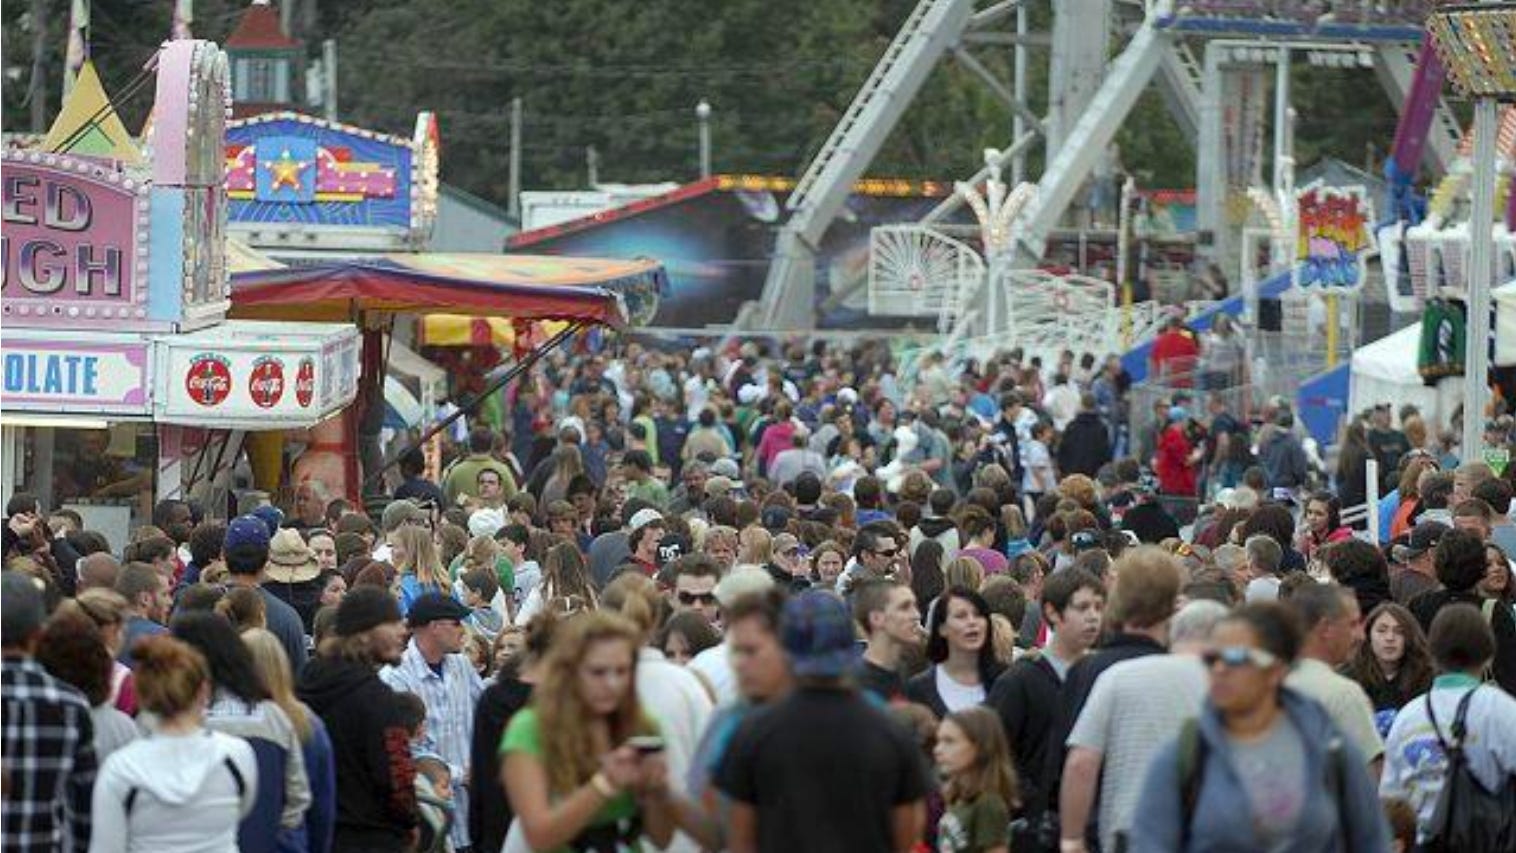 The Rochester Fair is rebranding, expanding to be Granite State Fair